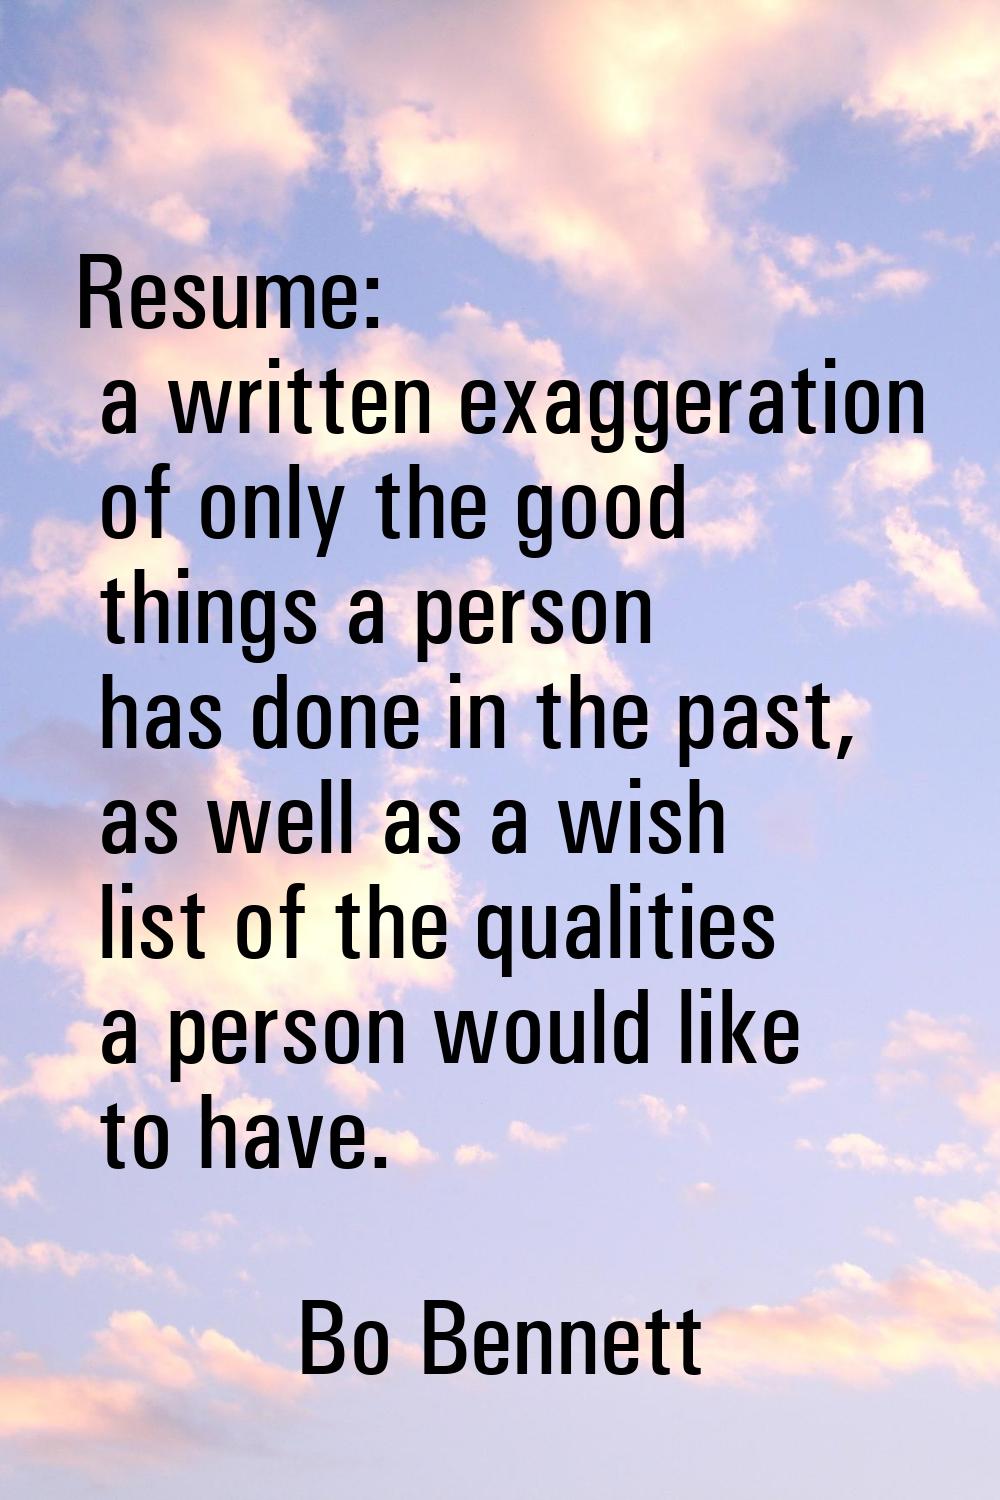 Resume: a written exaggeration of only the good things a person has done in the past, as well as a 